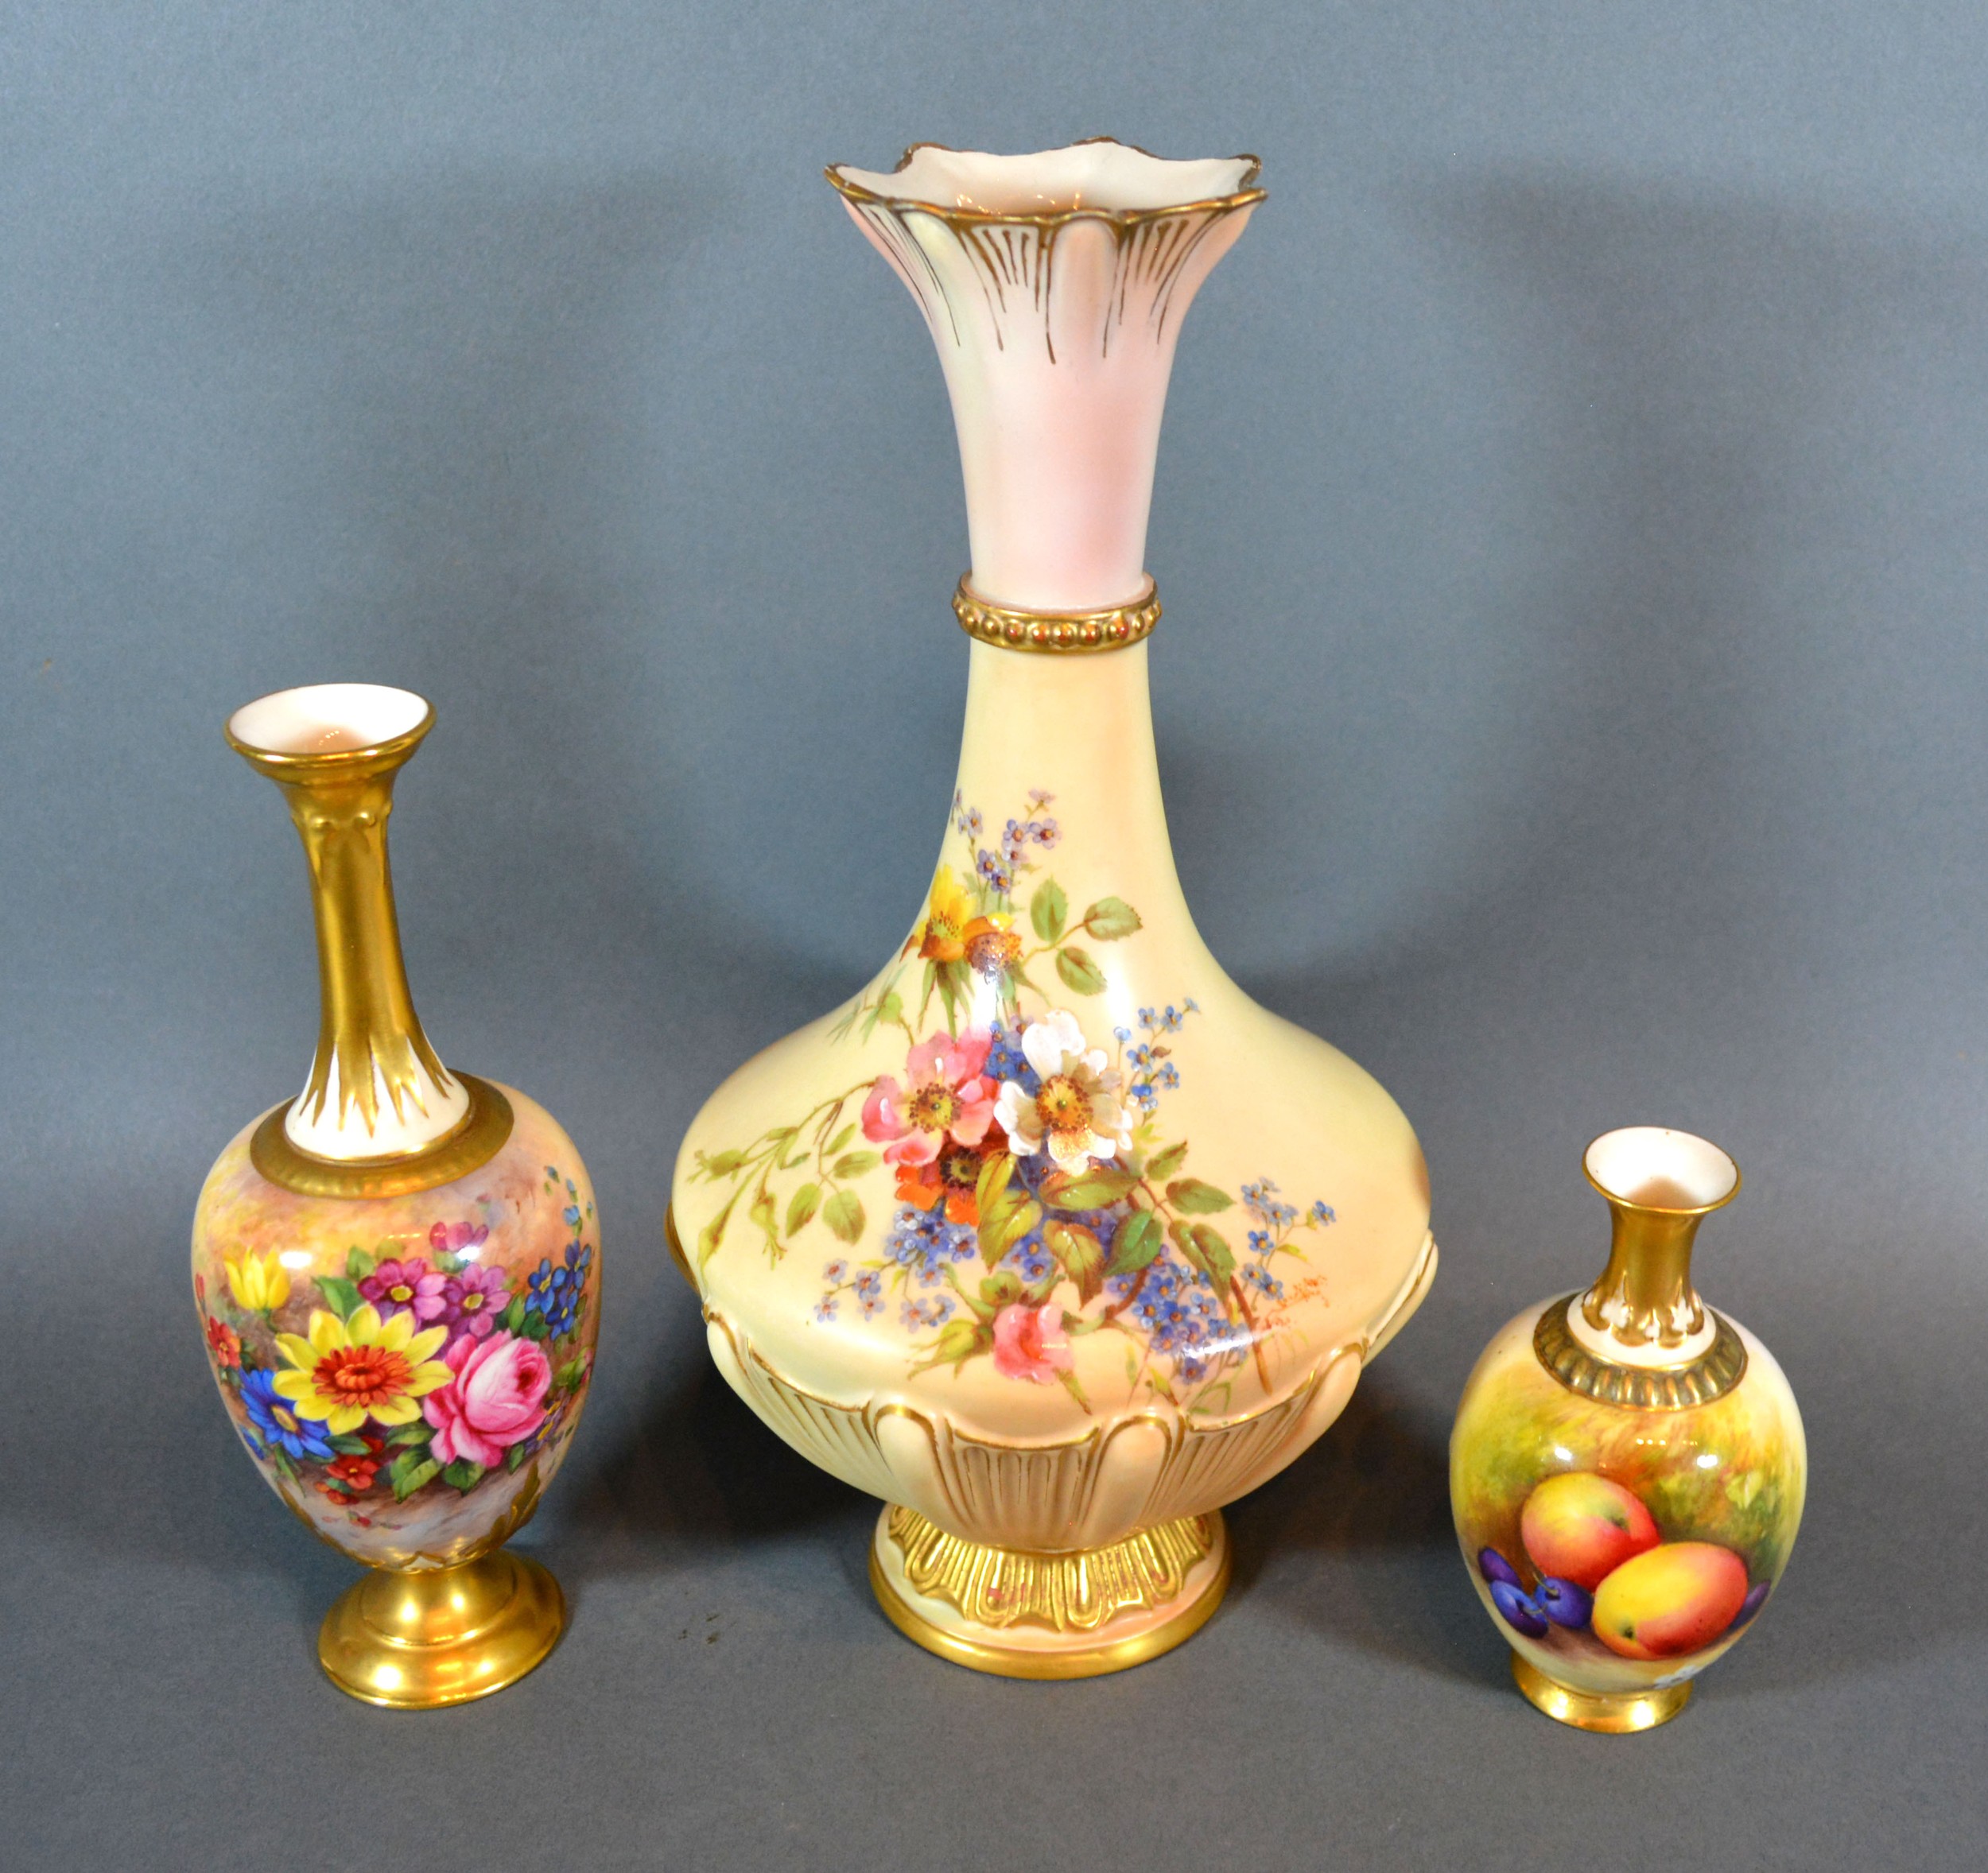 A Royal Worcester Porcelain Vase hand painted by Ernest Barker 18.5 cms tall together with another